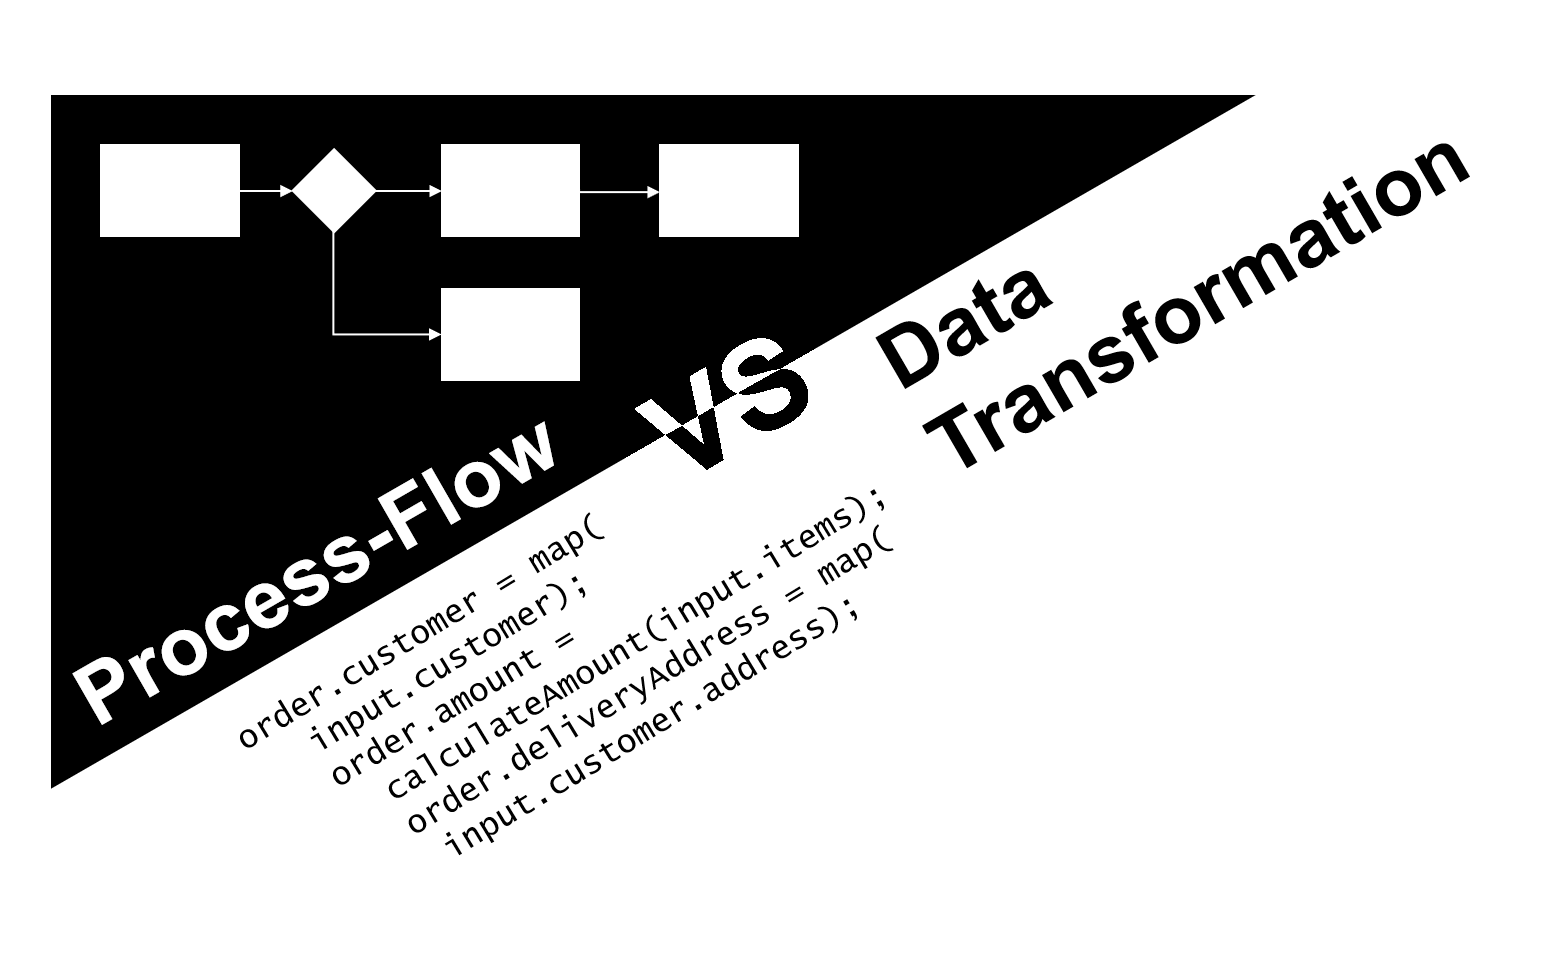 From Research to Practice (1): Analysis of Data-Flow Complexity (in Executable Business Processes) and Architectural Implications